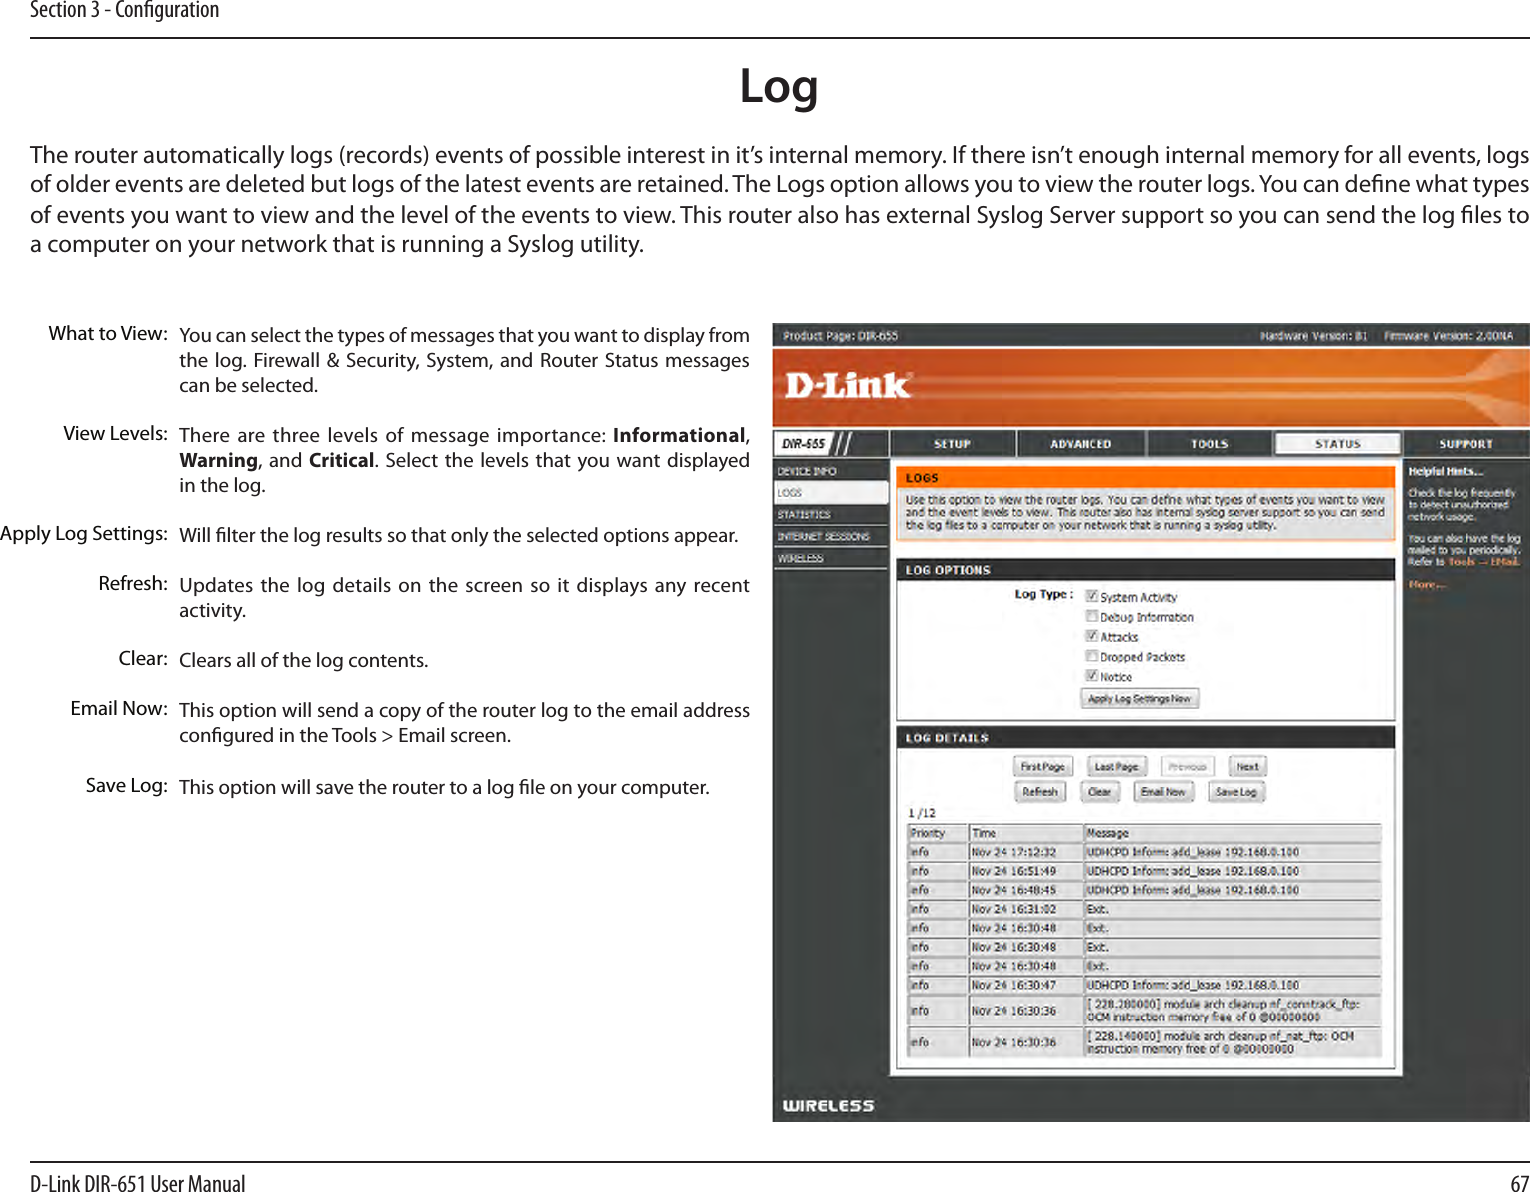 67D-Link DIR-651 User ManualSection 3 - CongurationLogWhat to View:View Levels:Apply Log Settings:Refresh:Clear:Email Now:Save Log:You can select the types of messages that you want to display from the log. Firewall &amp; Security, System, and Router  Status messages can be selected.There are three levels  of message  importance: Informational, Warning, and Critical.  Select the  levels that  you want  displayed in the log.Will lter the log results so that only the selected options appear.Updates the log details  on  the screen so it displays any recent activity.Clears all of the log contents.This option will send a copy of the router log to the email address congured in the Tools &gt; Email screen.This option will save the router to a log le on your computer.The router automatically logs (records) events of possible interest in it’s internal memory. If there isn’t enough internal memory for all events, logs of older events are deleted but logs of the latest events are retained. The Logs option allows you to view the router logs. You can dene what types of events you want to view and the level of the events to view. This router also has external Syslog Server support so you can send the log les to a computer on your network that is running a Syslog utility.